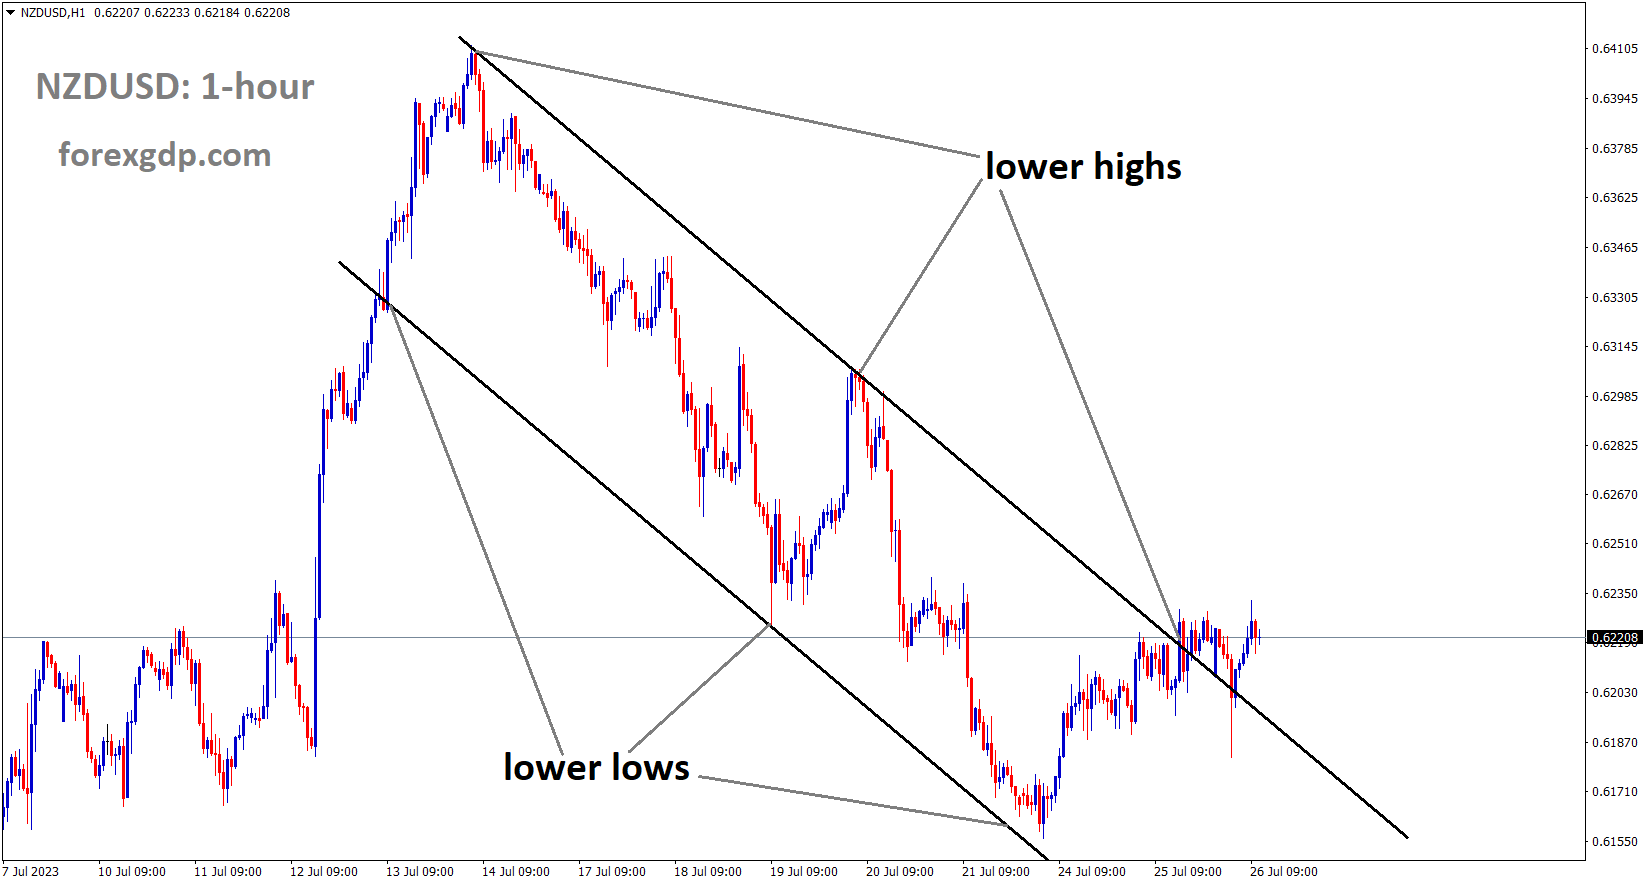 NZDUSD is moving in the Descending channel and the market has reached the lower high area of the channel 1